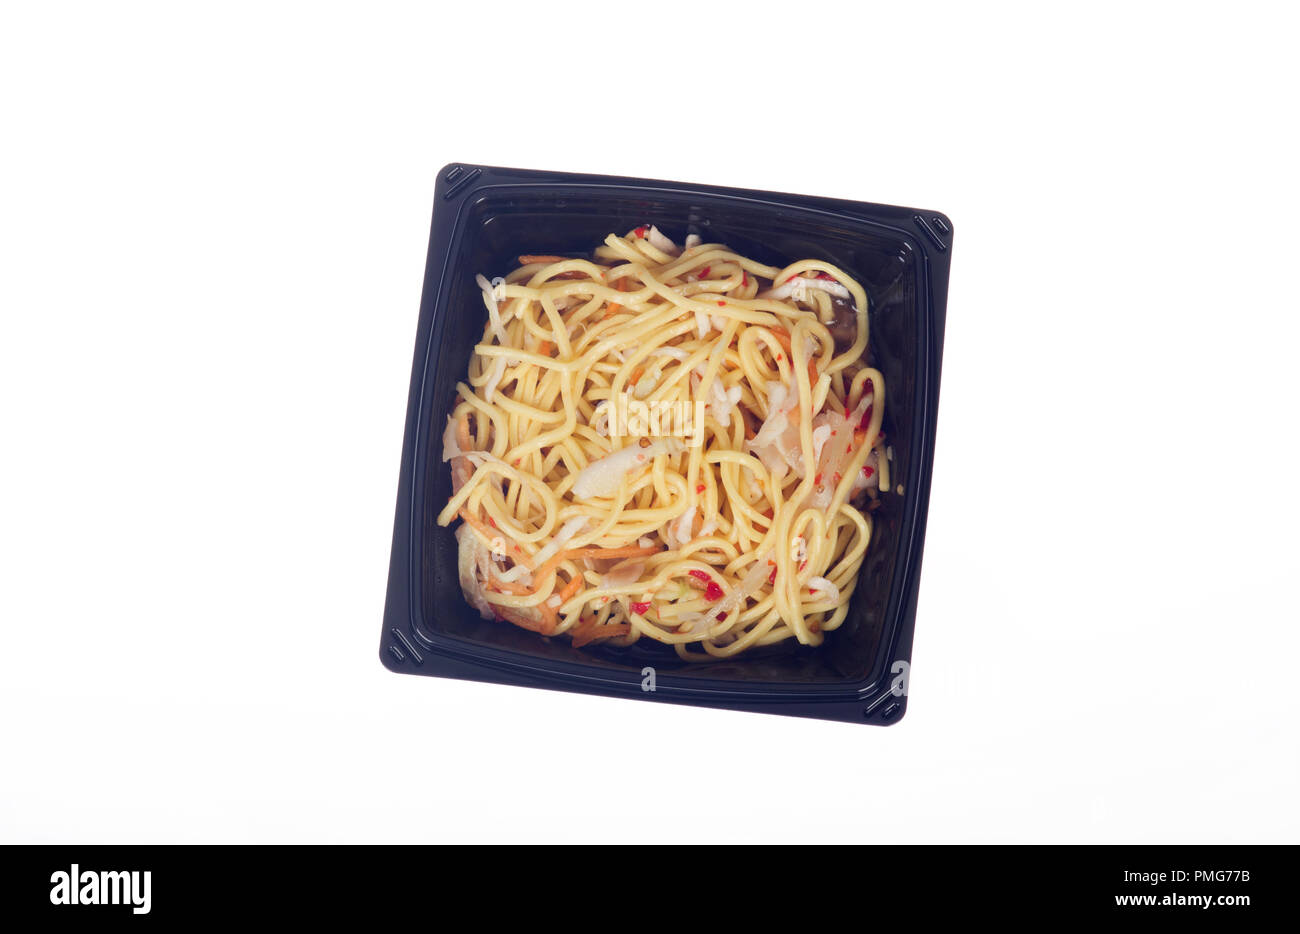 Takeaway or takeout container of prepared food Thai Chili noodles in black plastic on white background Stock Photo